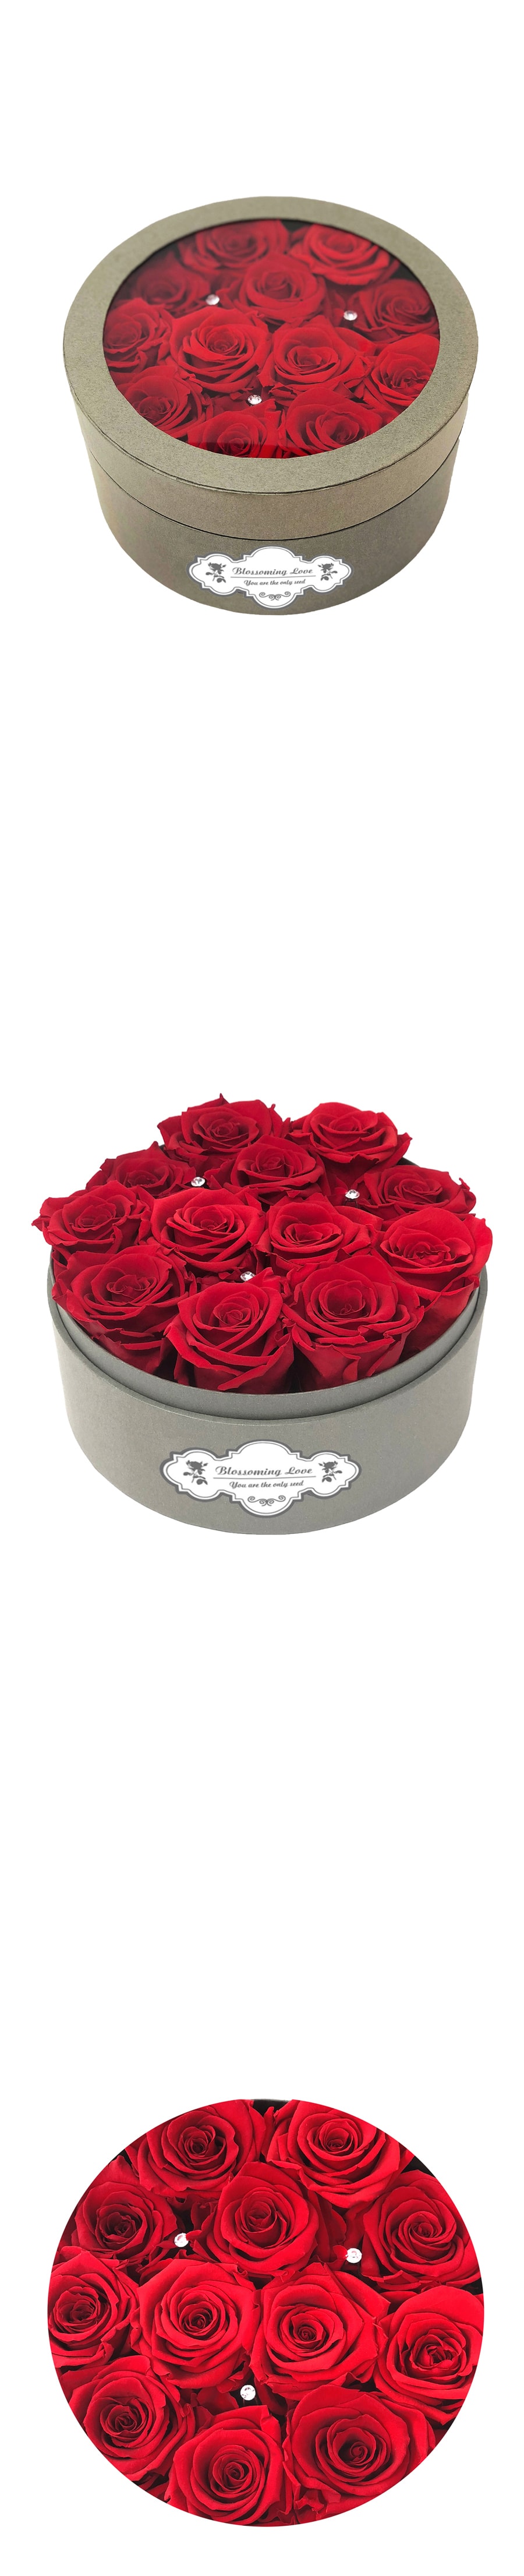 See-through small round box - Red preserved roses